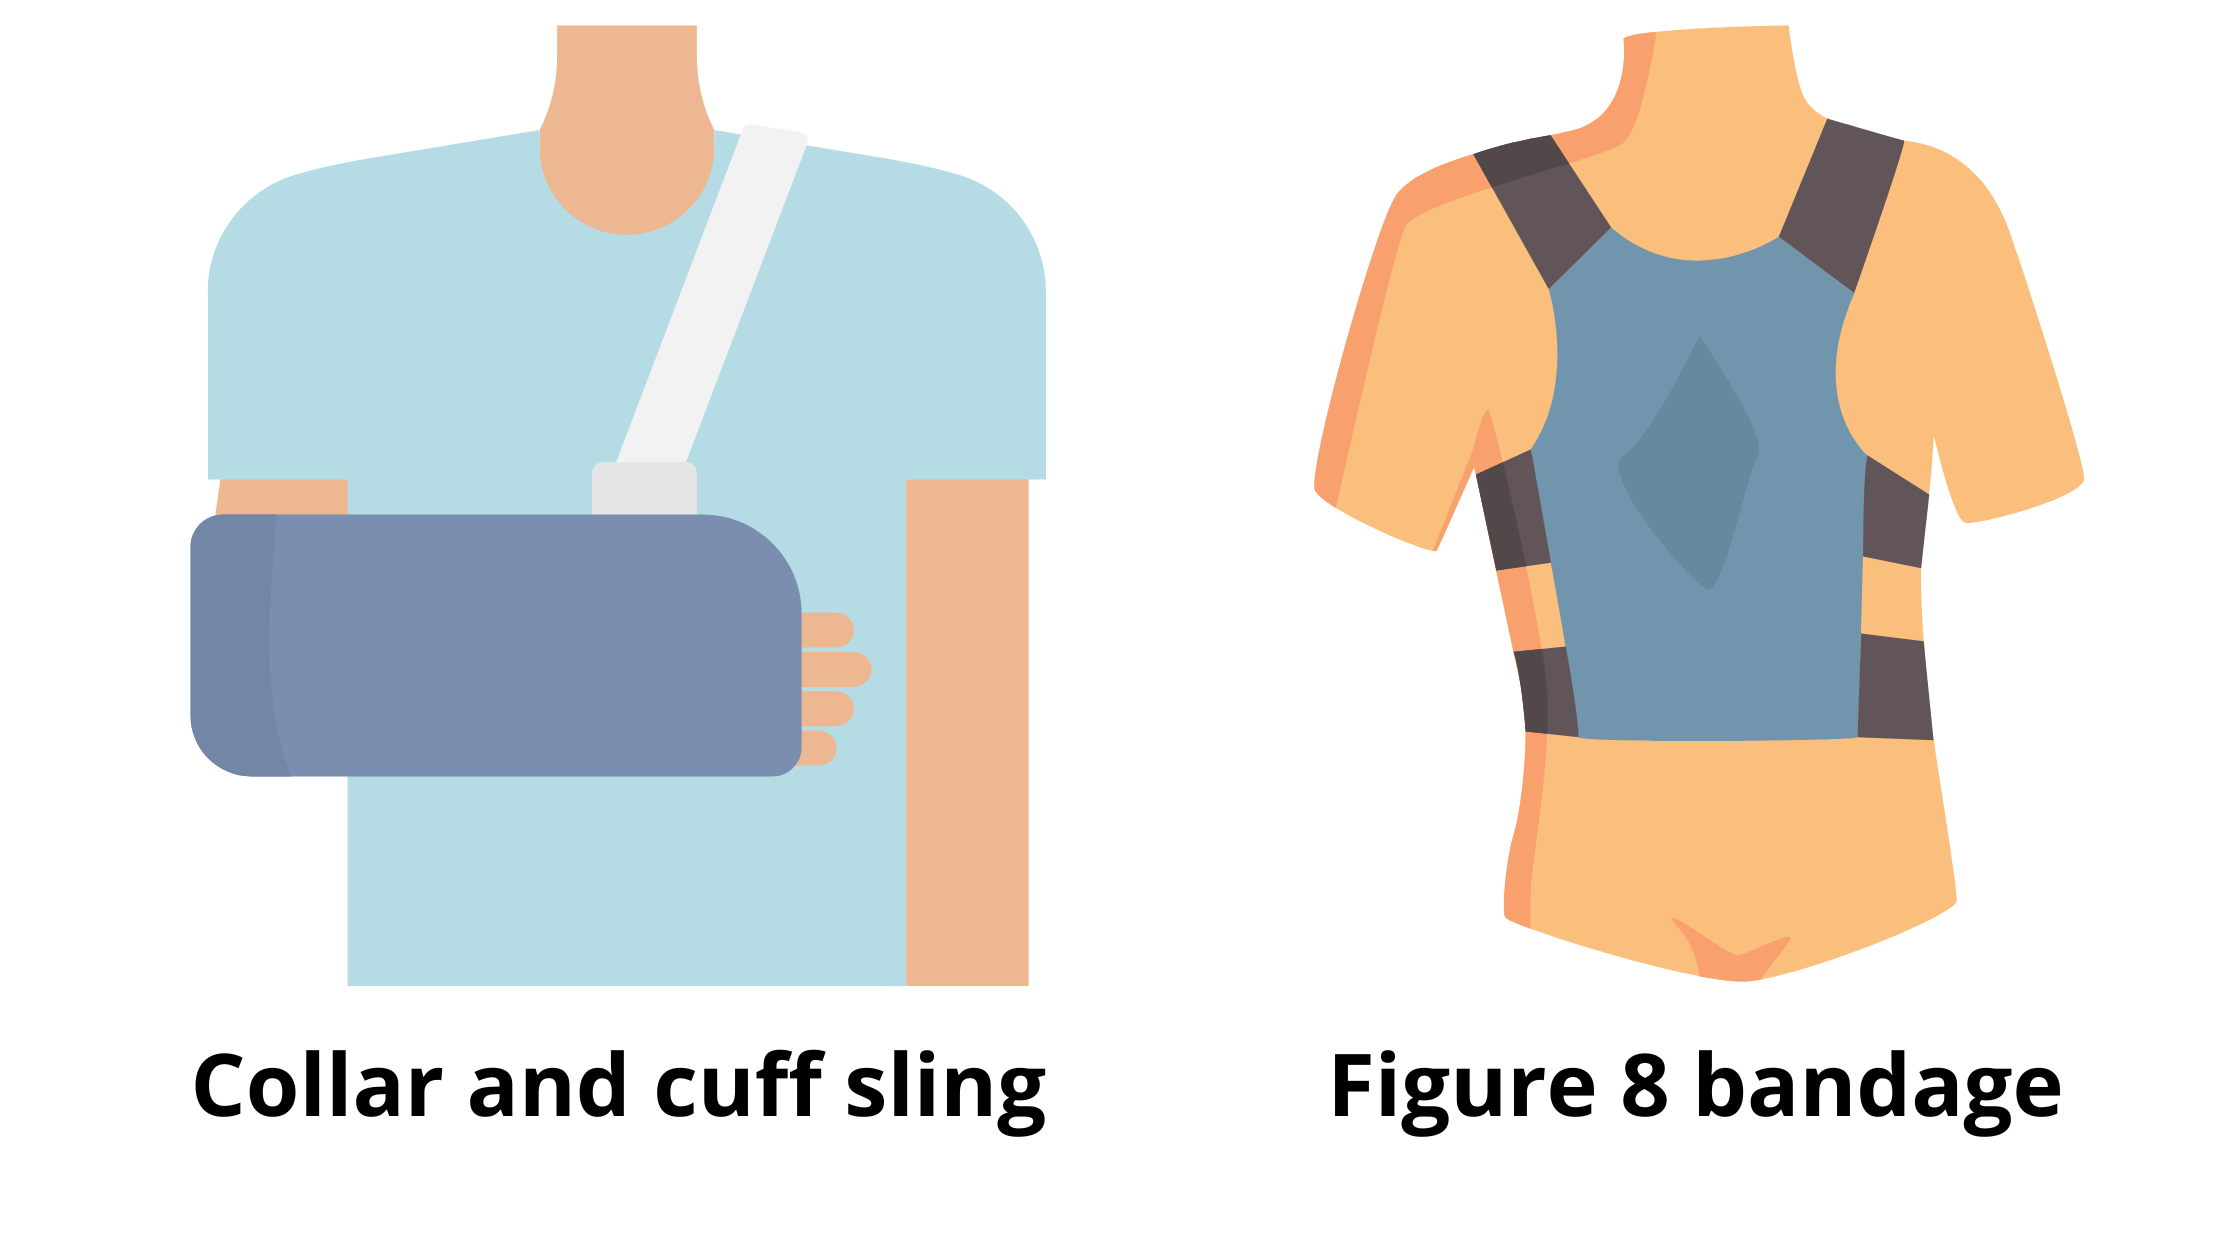 cuff-and-collar-harness-and-figure-of-eight-bandage-are-the-mostly-adopted-conservative-therapies